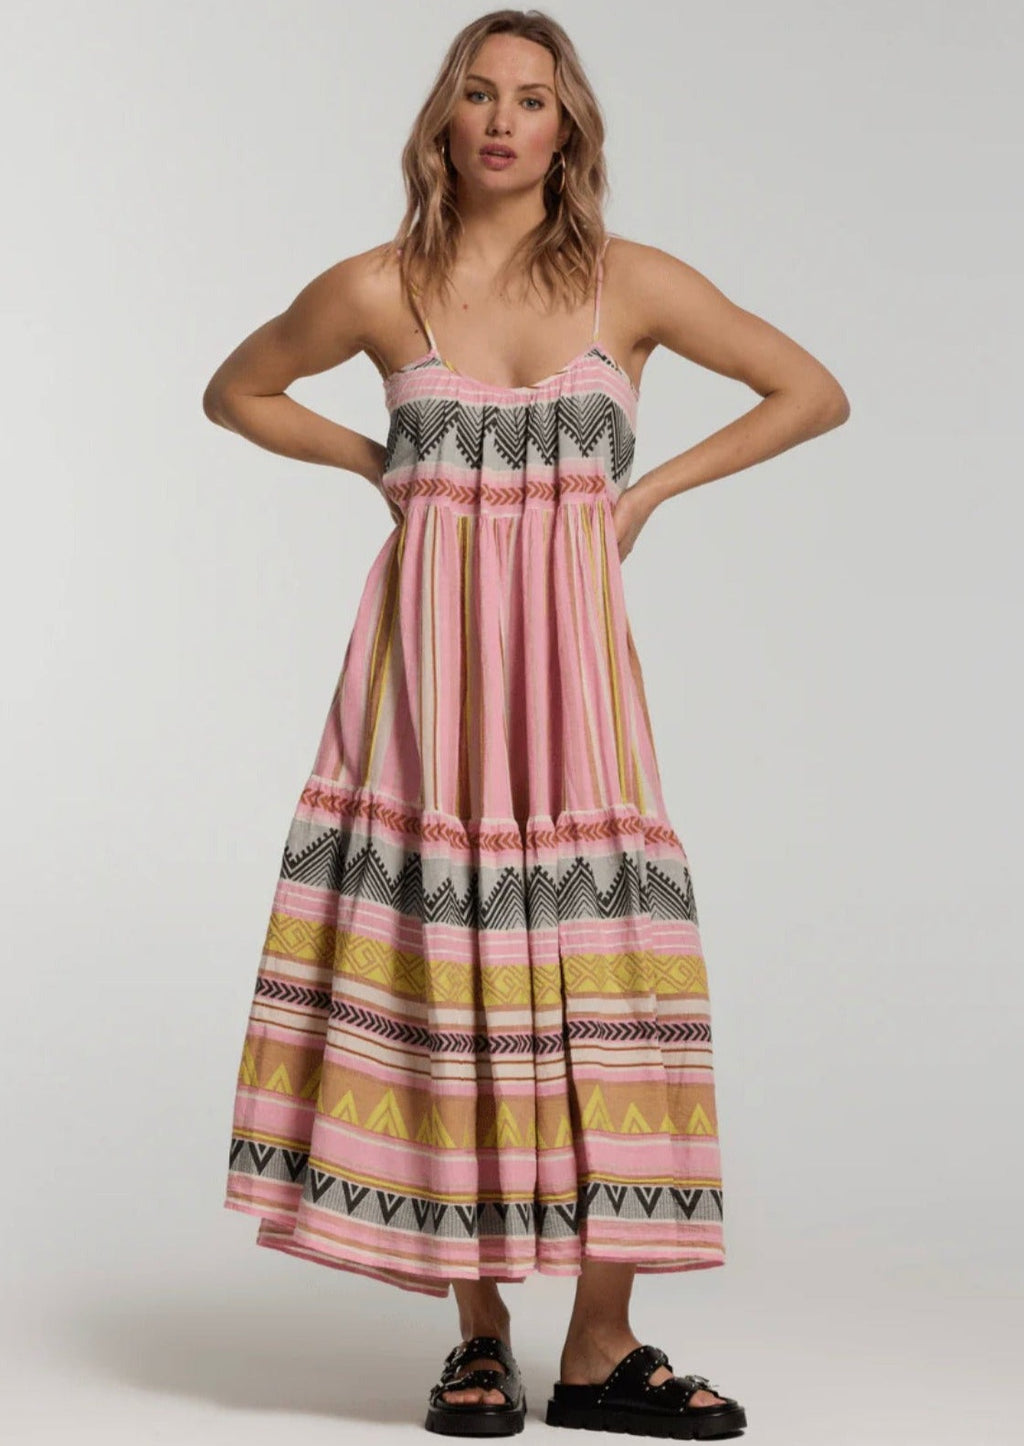 Devotion Plaka Dress - Multi Pink For an effortless summer look, choose the Plaka Long Dress from Greek resort wear designer Devotion. Crafted in cotton with hand embroidered detailing, and flowing skirt, the Plaka dress will take you from day to night.